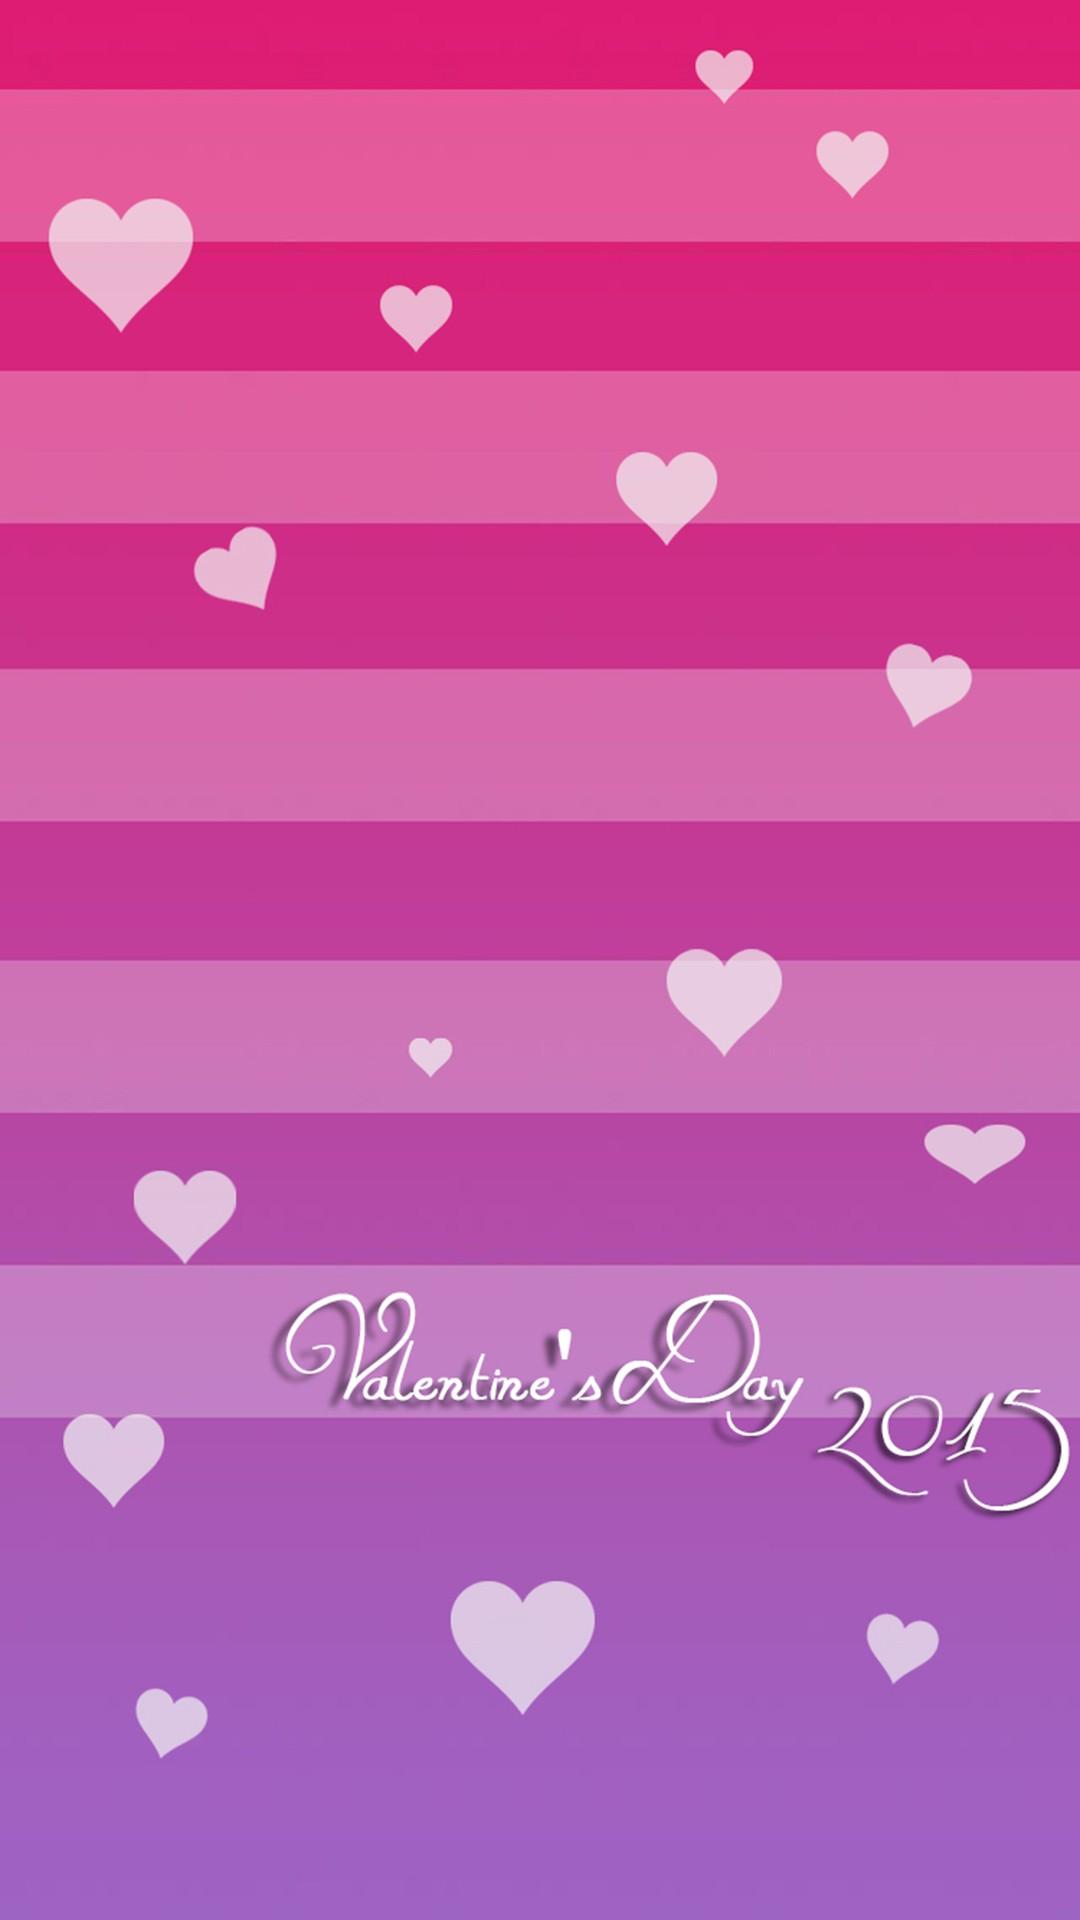 Wallpaper Android Happy Valentines Day Image Android